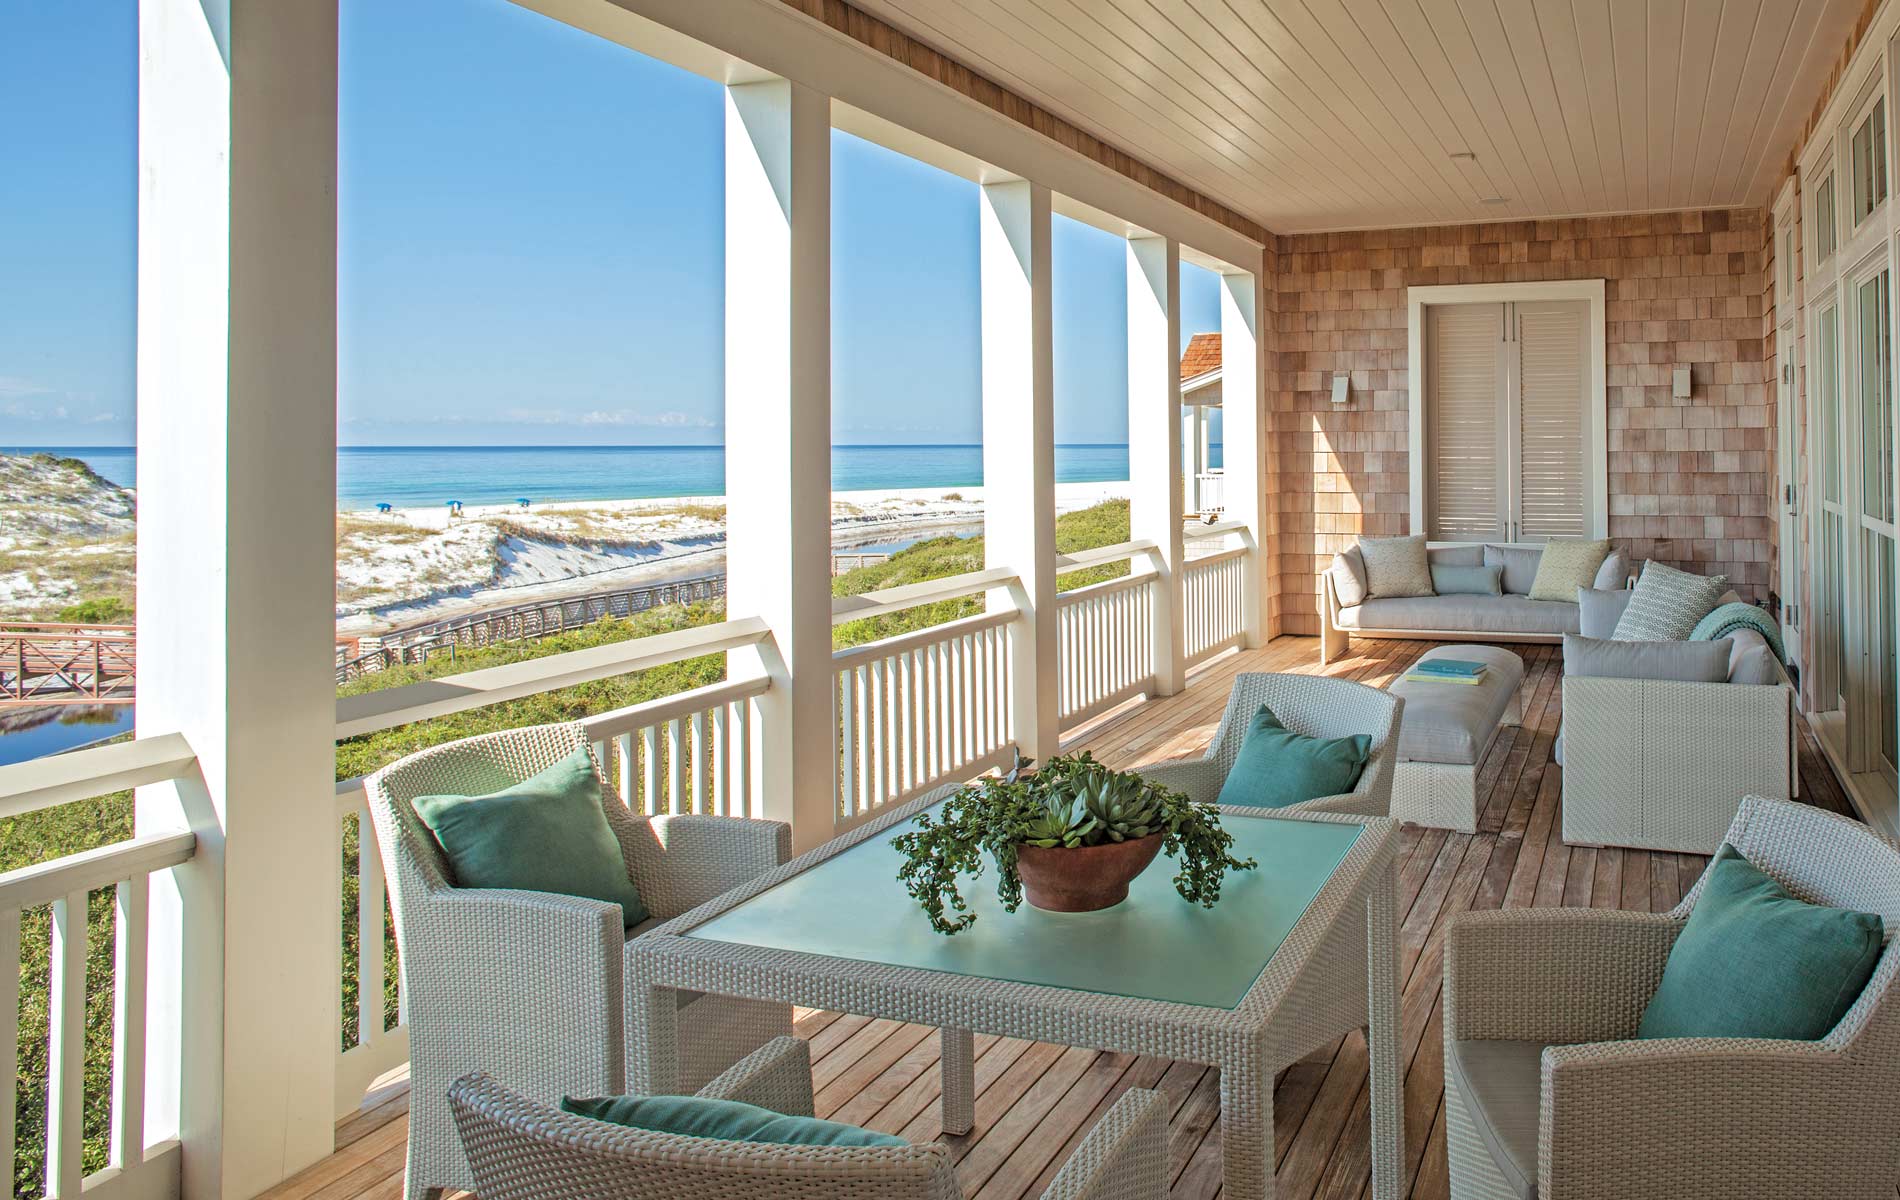 Deck with beach view and chairs